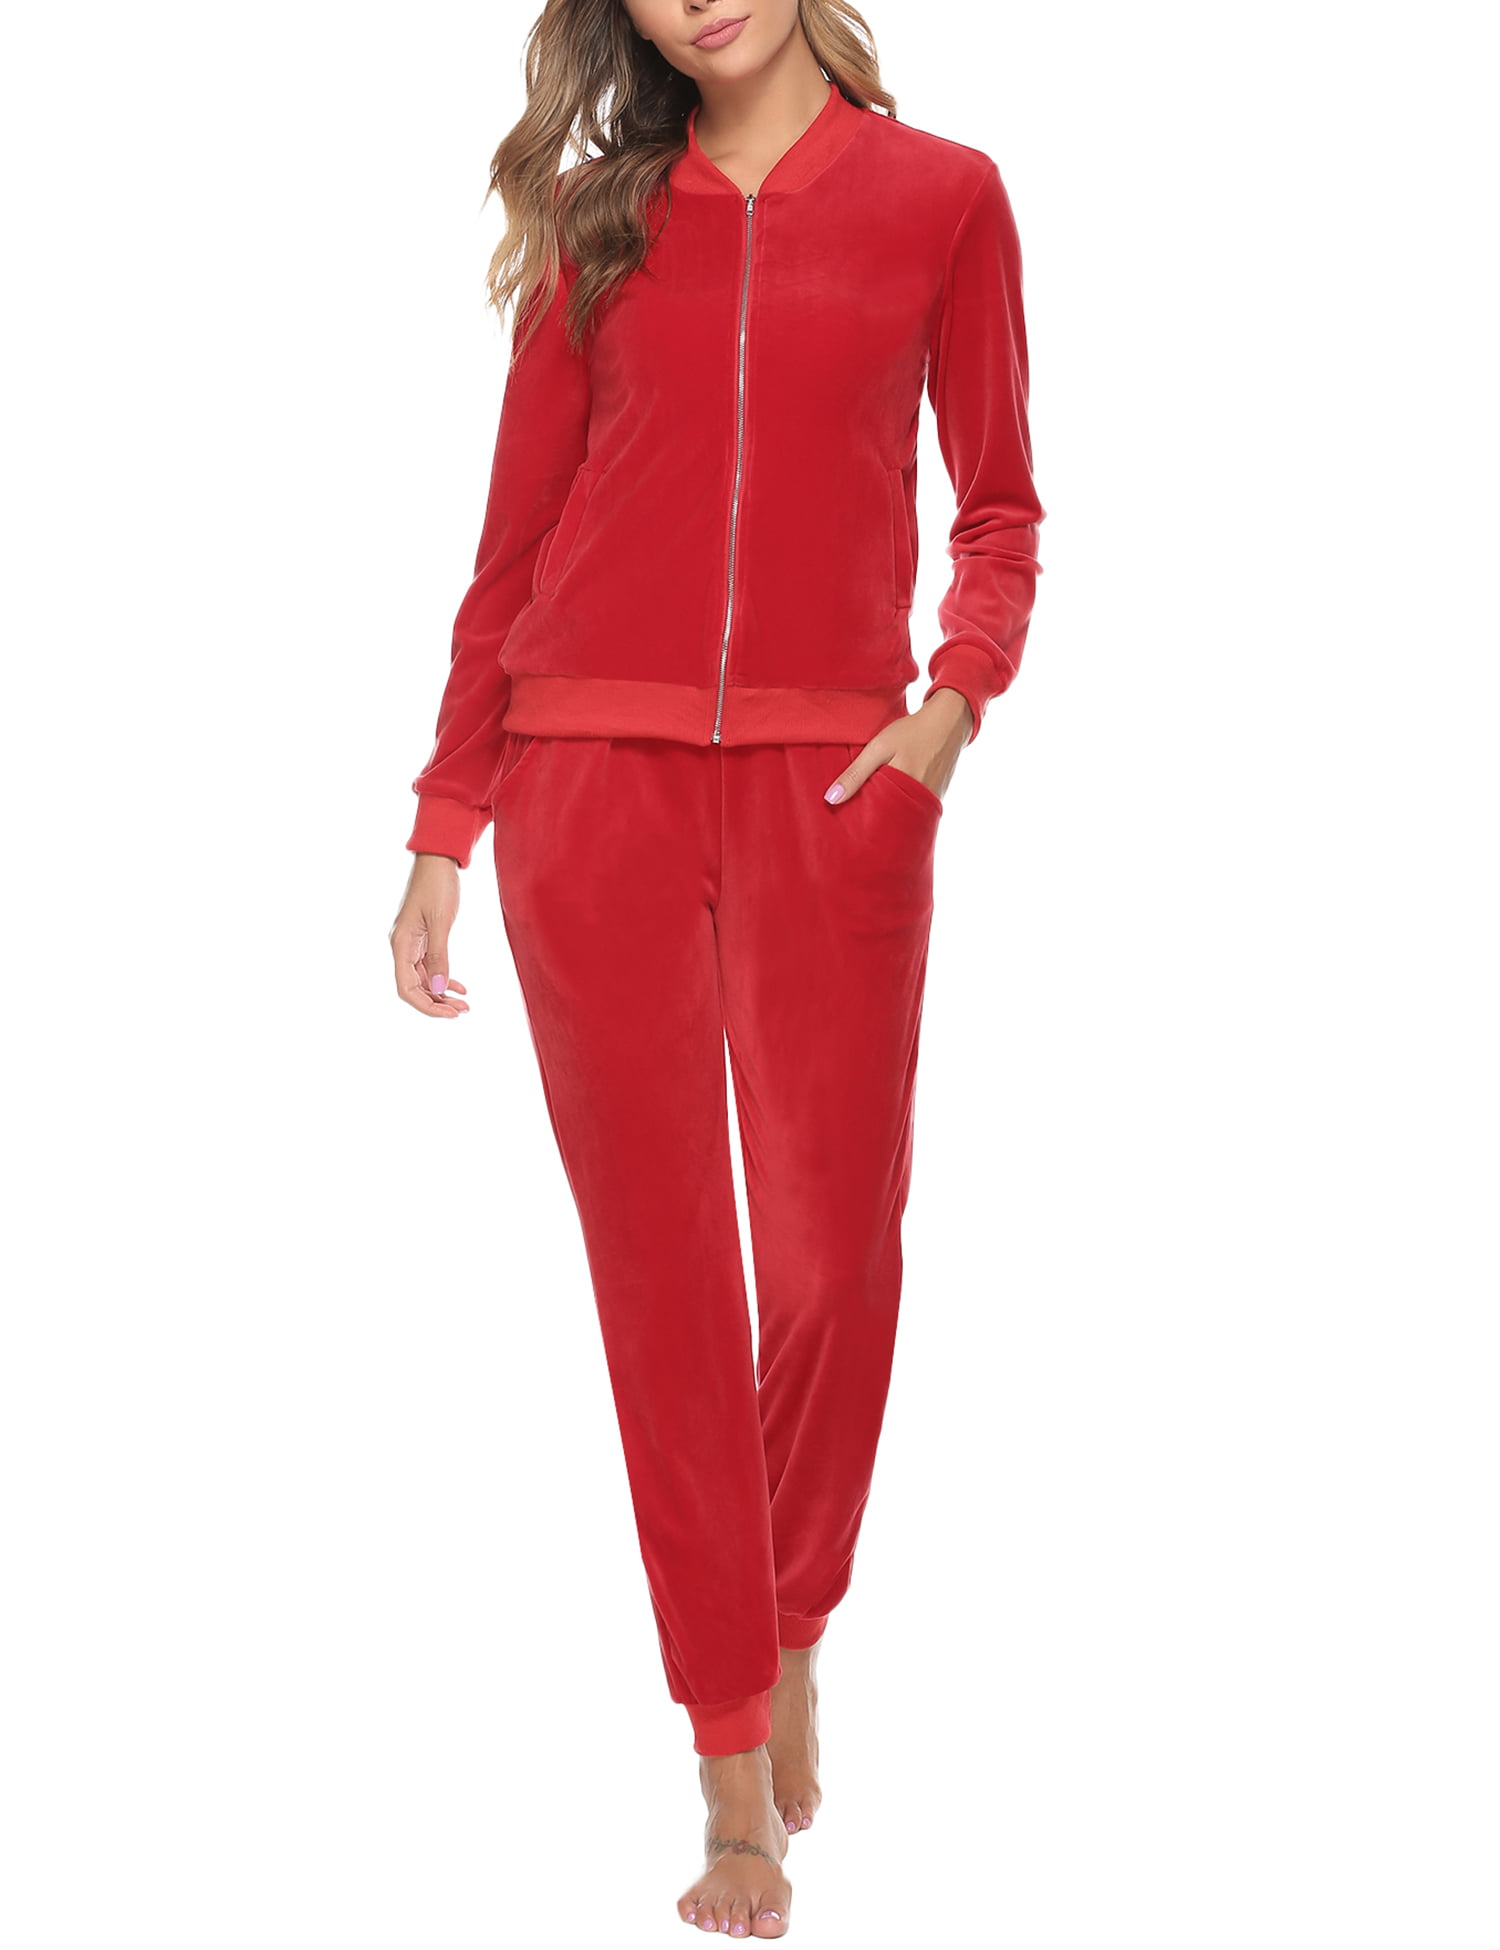 Akalnny Tracksuits Womens Long Sleeve Sweatsuit Set Jacket and Pants Sport Suits 